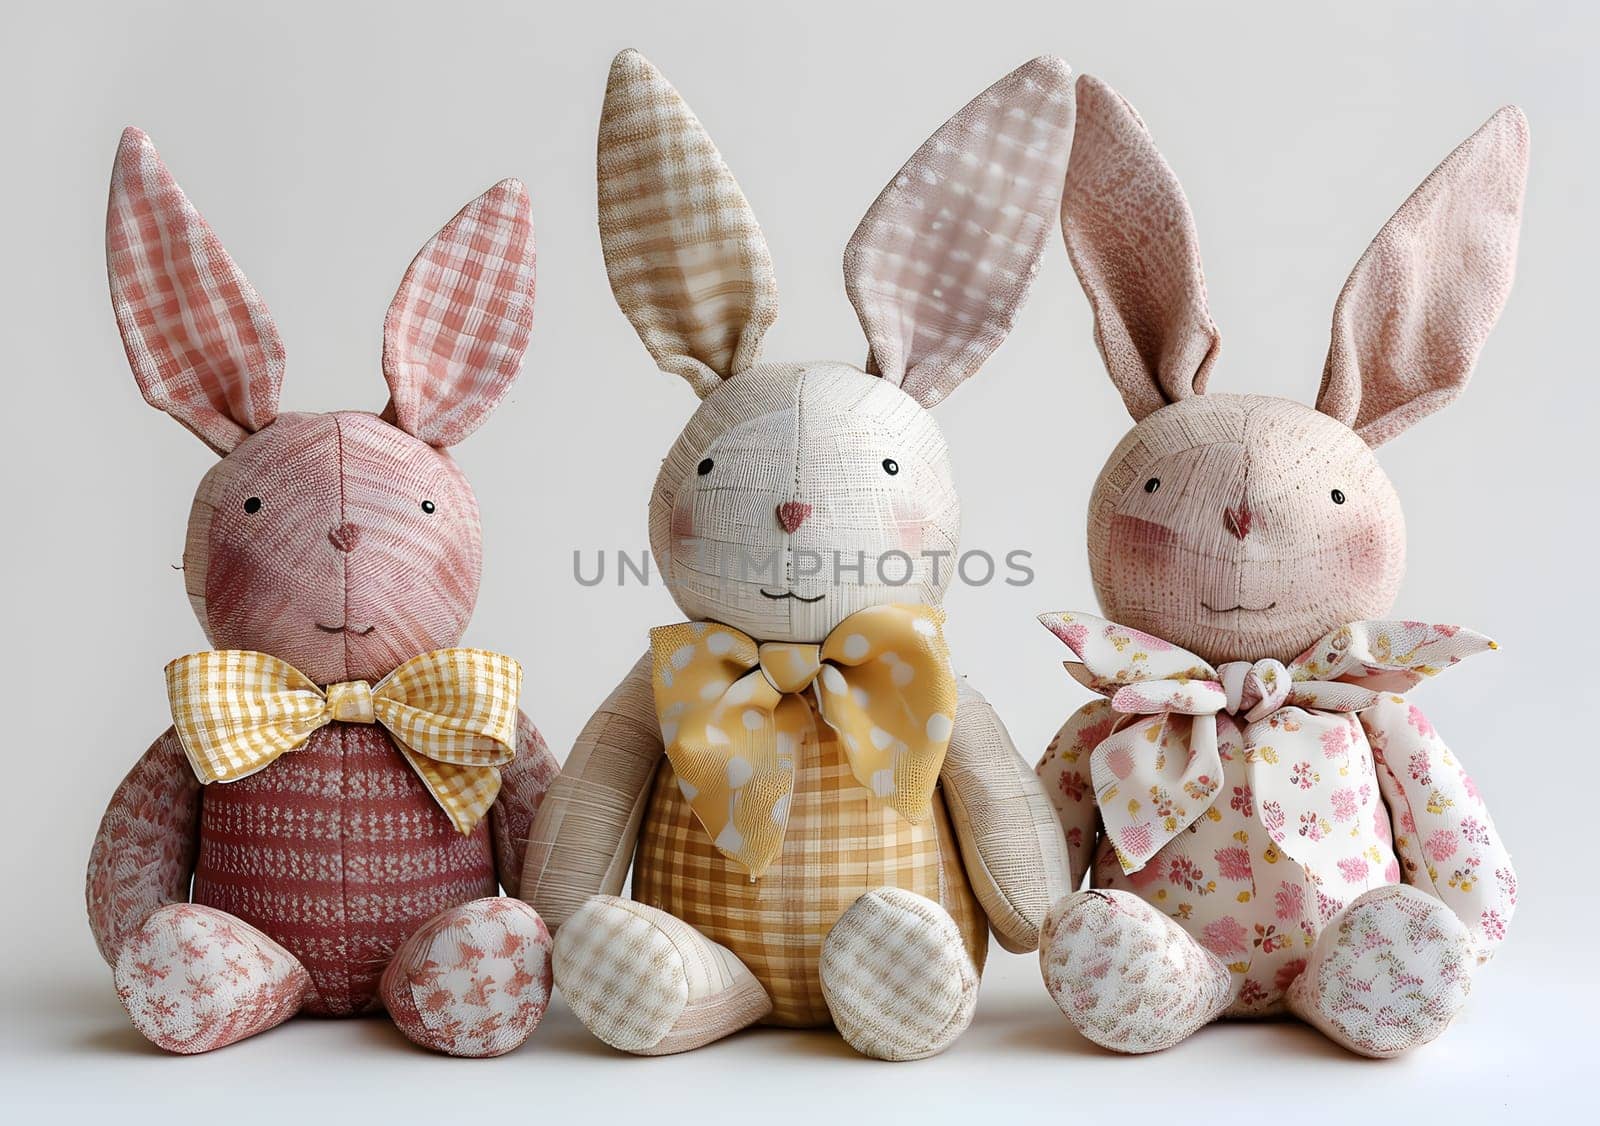 Three white stuffed bunny rabbits with pink ears sit together in a row by Nadtochiy